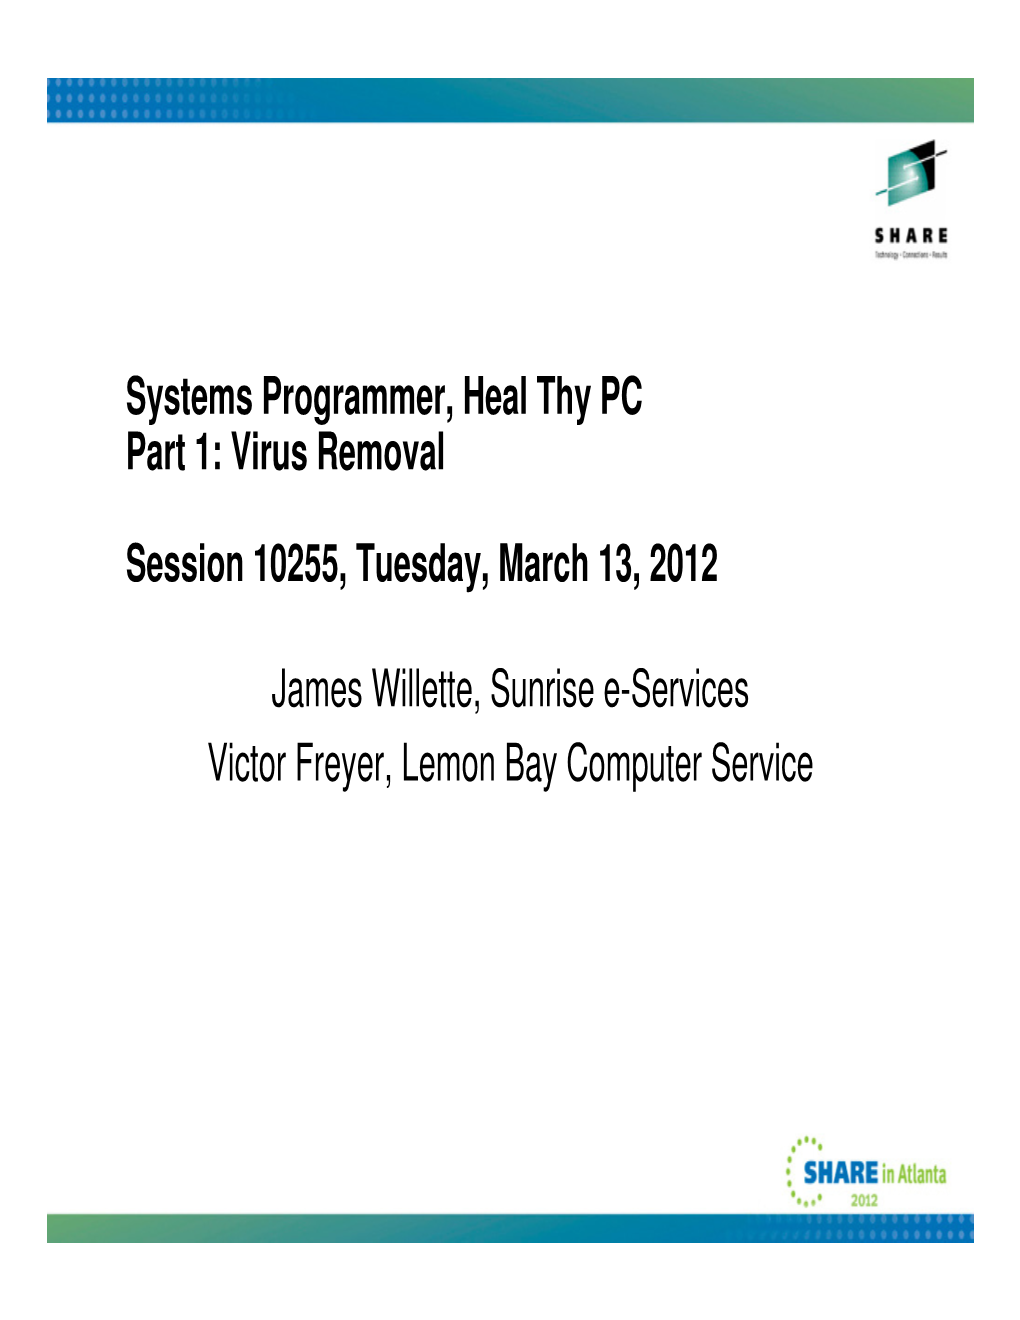 Systems Programmer, Heal Thy PC Part 1: Virus Removal Session